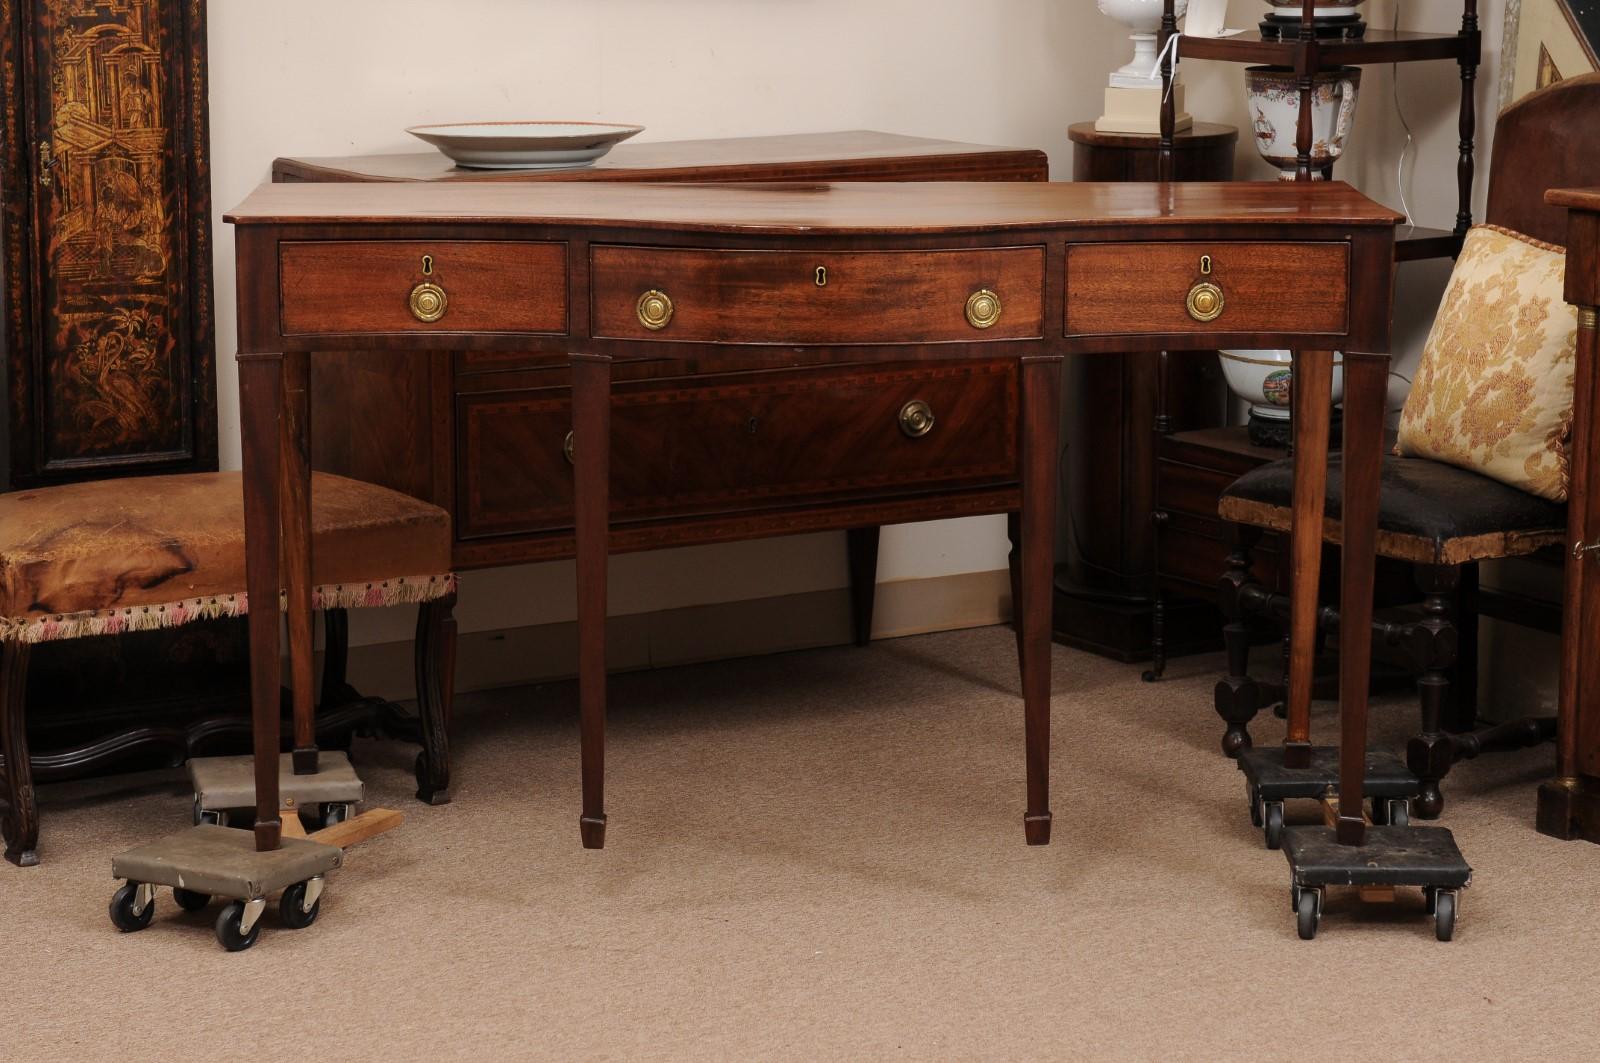 19th Century Mahogany Serving Serpentine Table with 3 Drawers For Sale 10